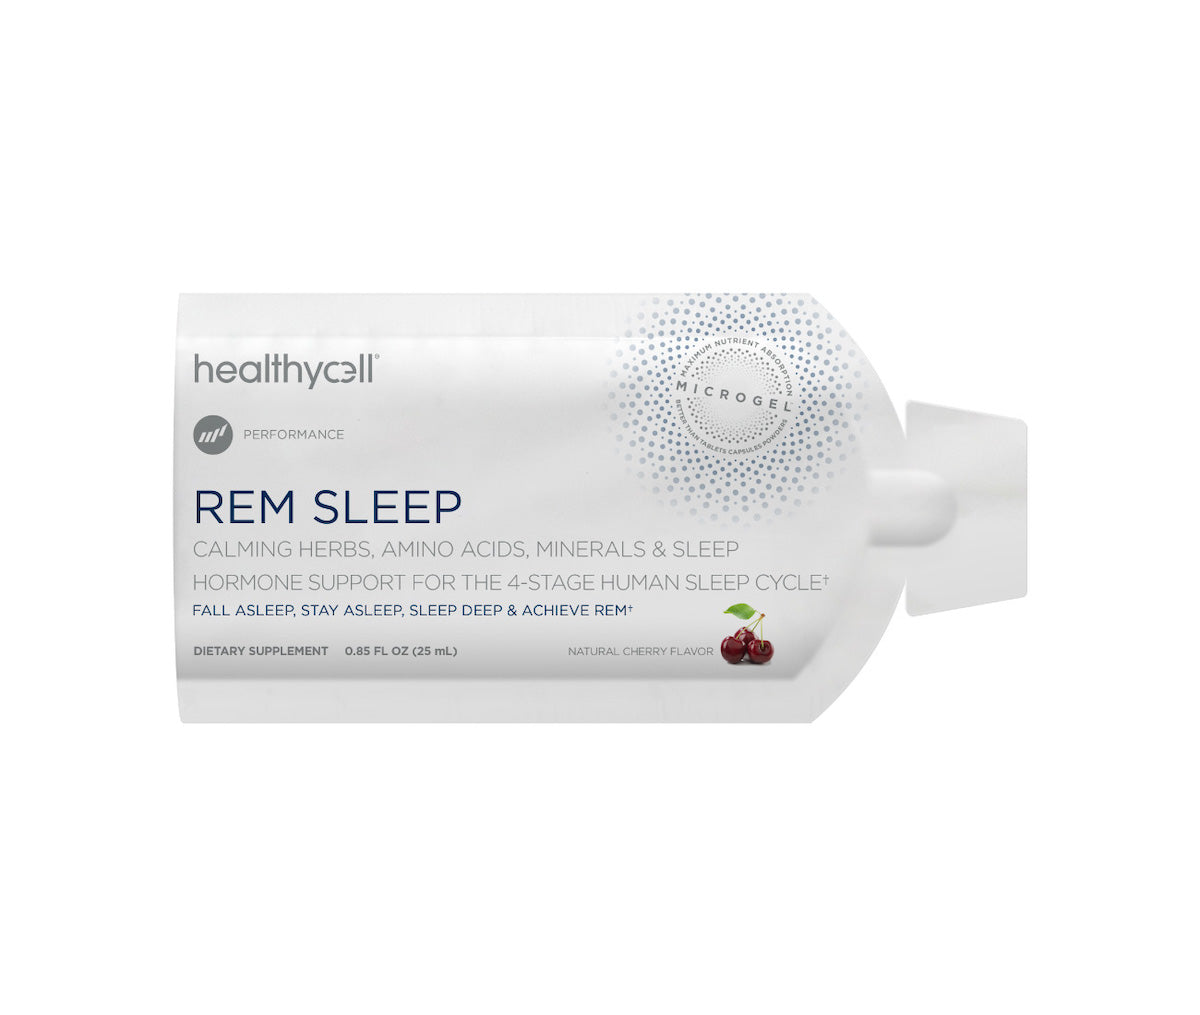 REM Sleep by Healthycell